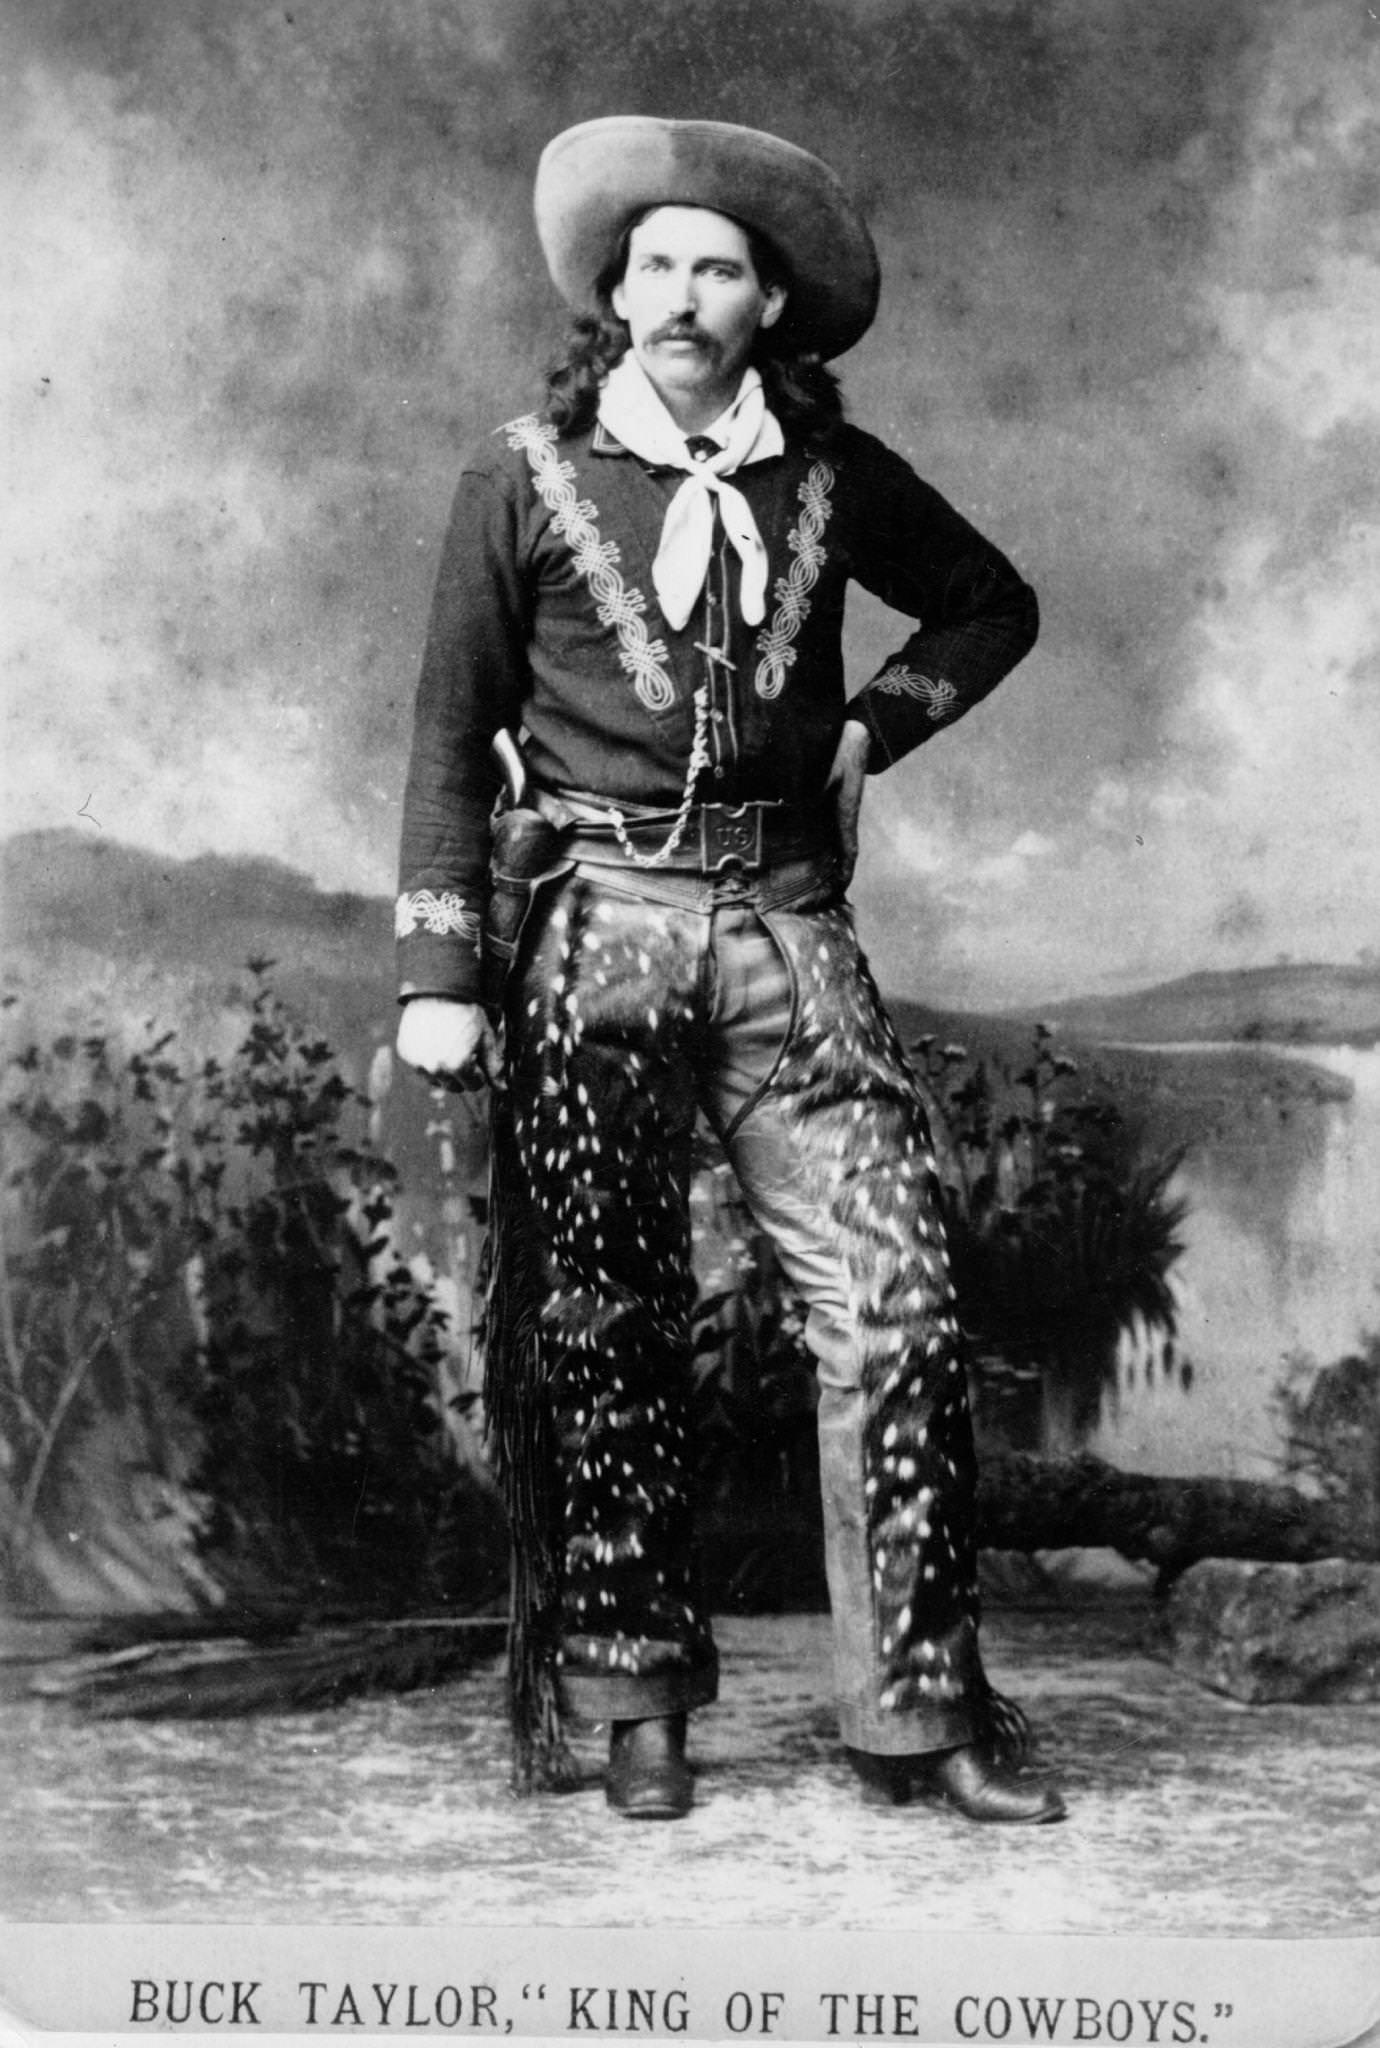 Buck Taylor, self-styled 'King of the Cowboys', wearing his Wild West showman's clothing